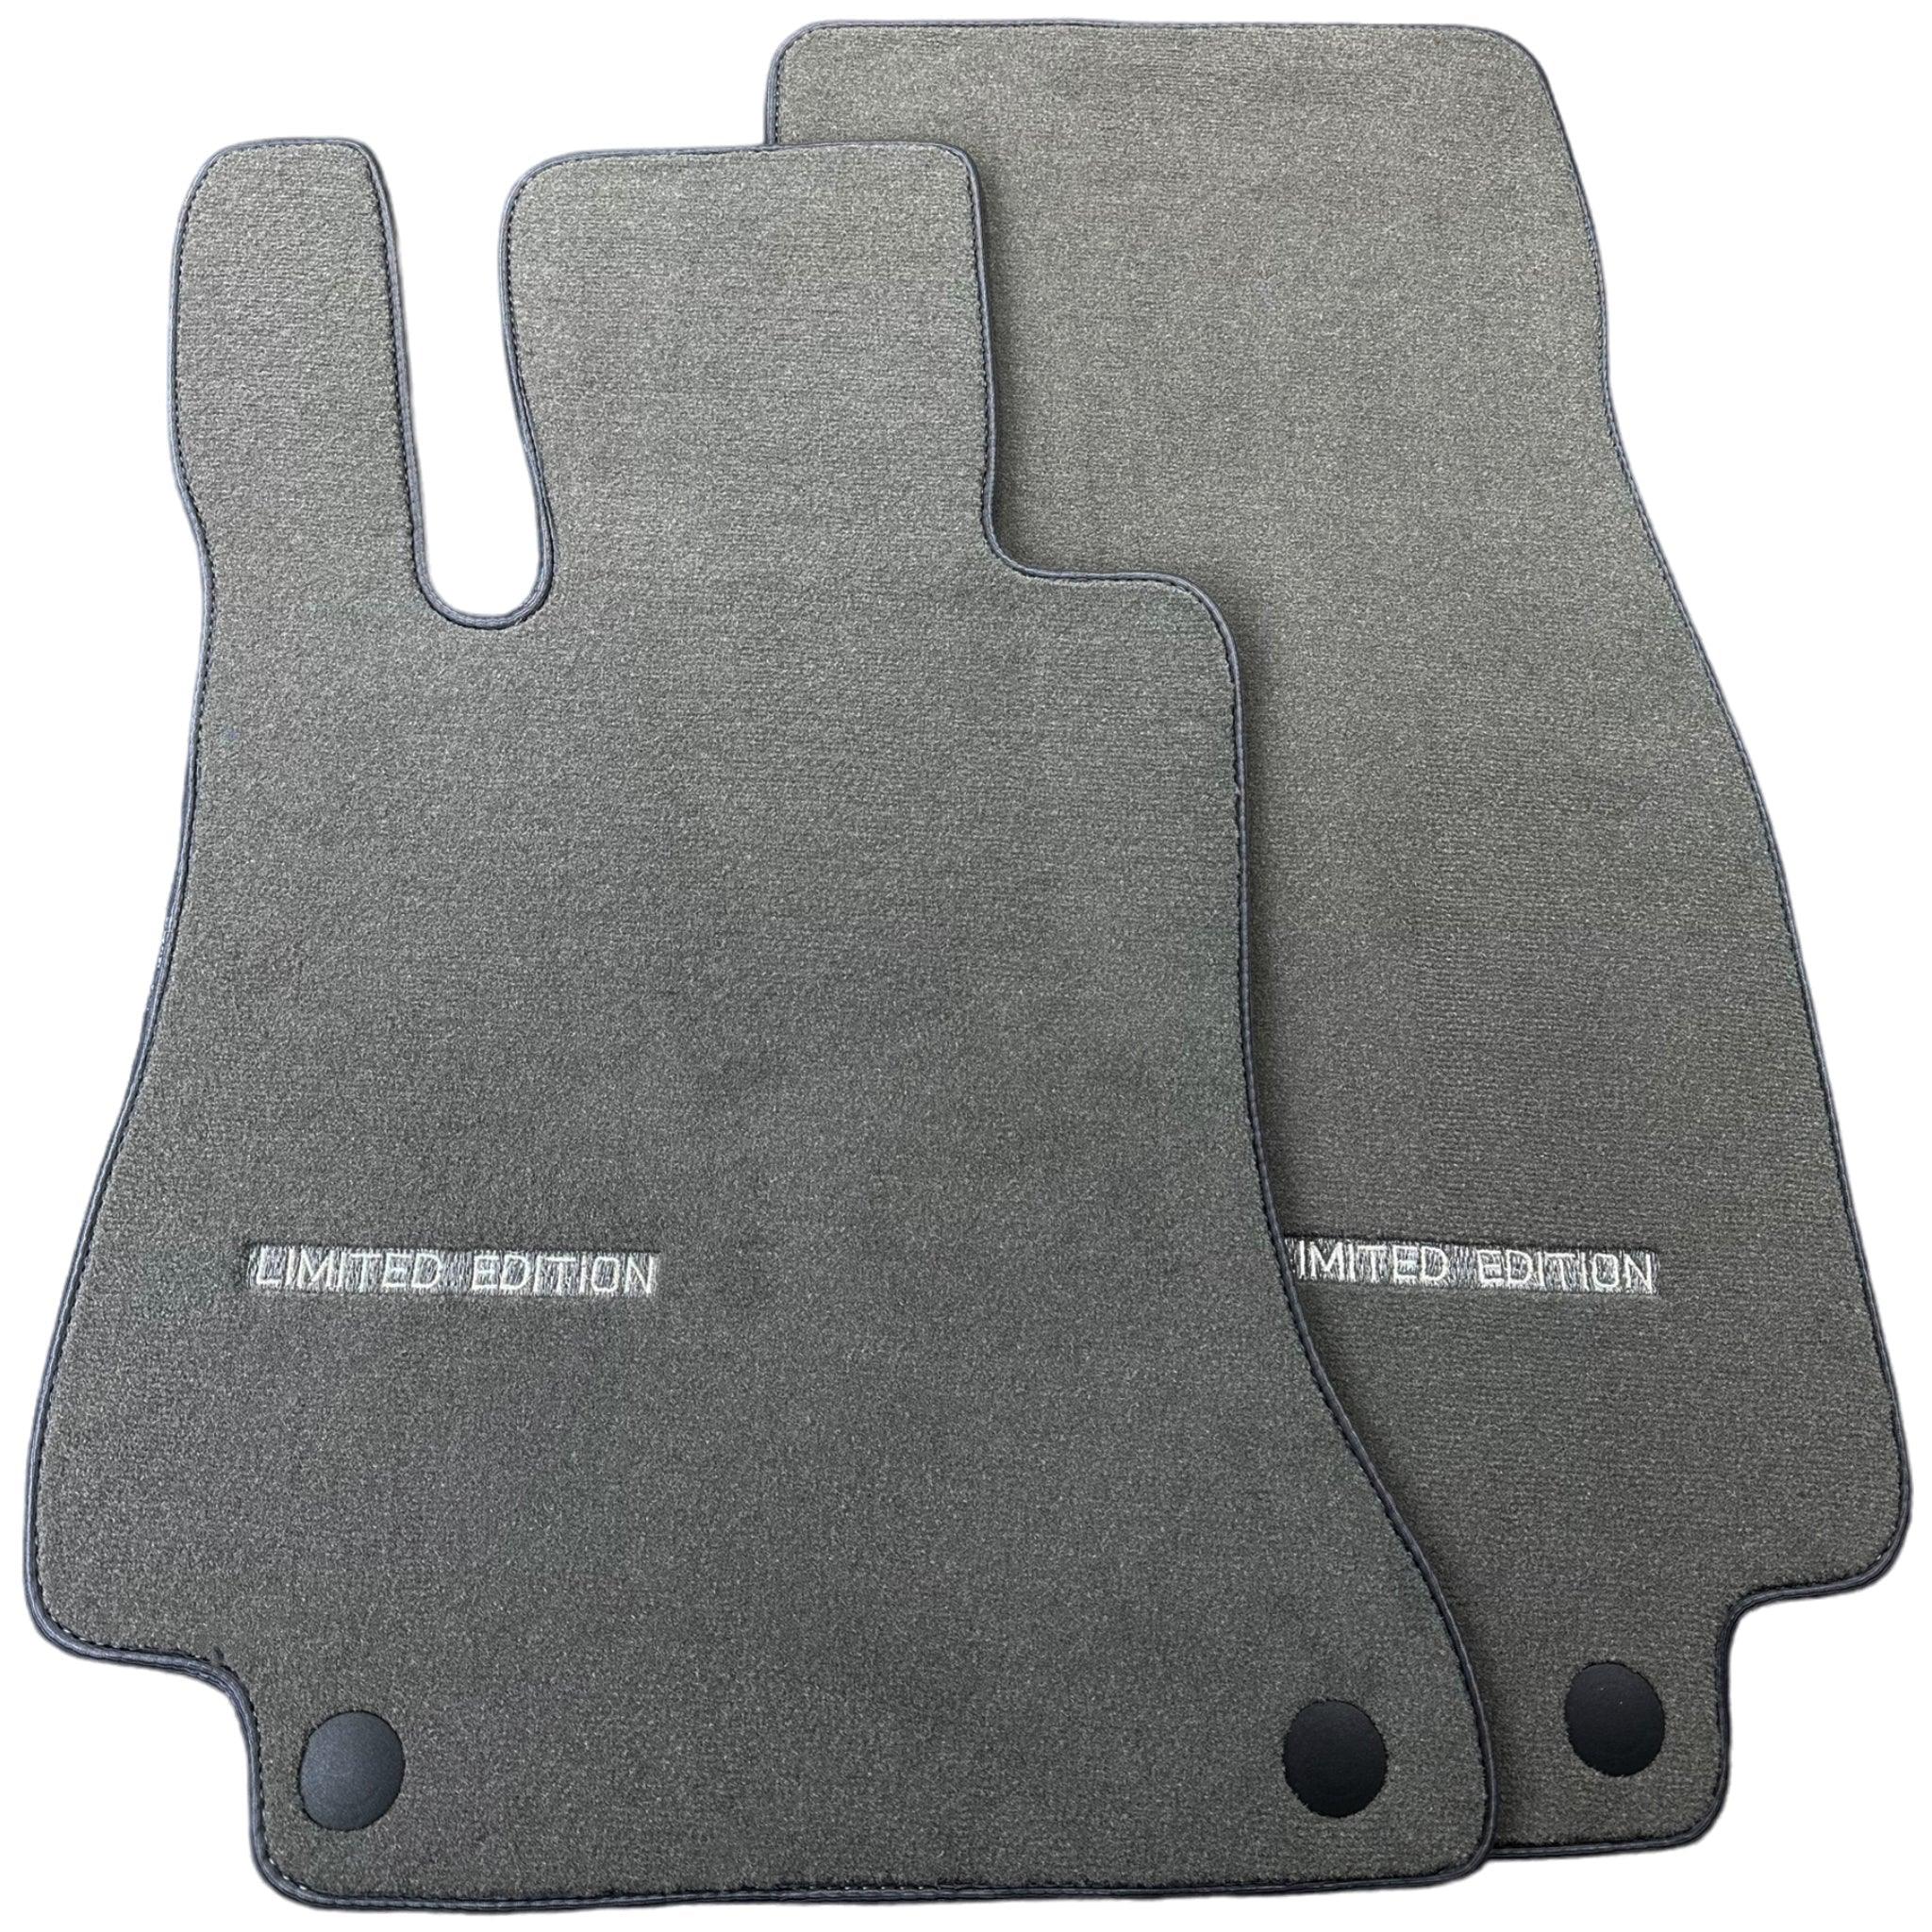 Gray Floor Mats For Mercedes Benz GLA-Class H247 (2020-2023) | Limited Edition